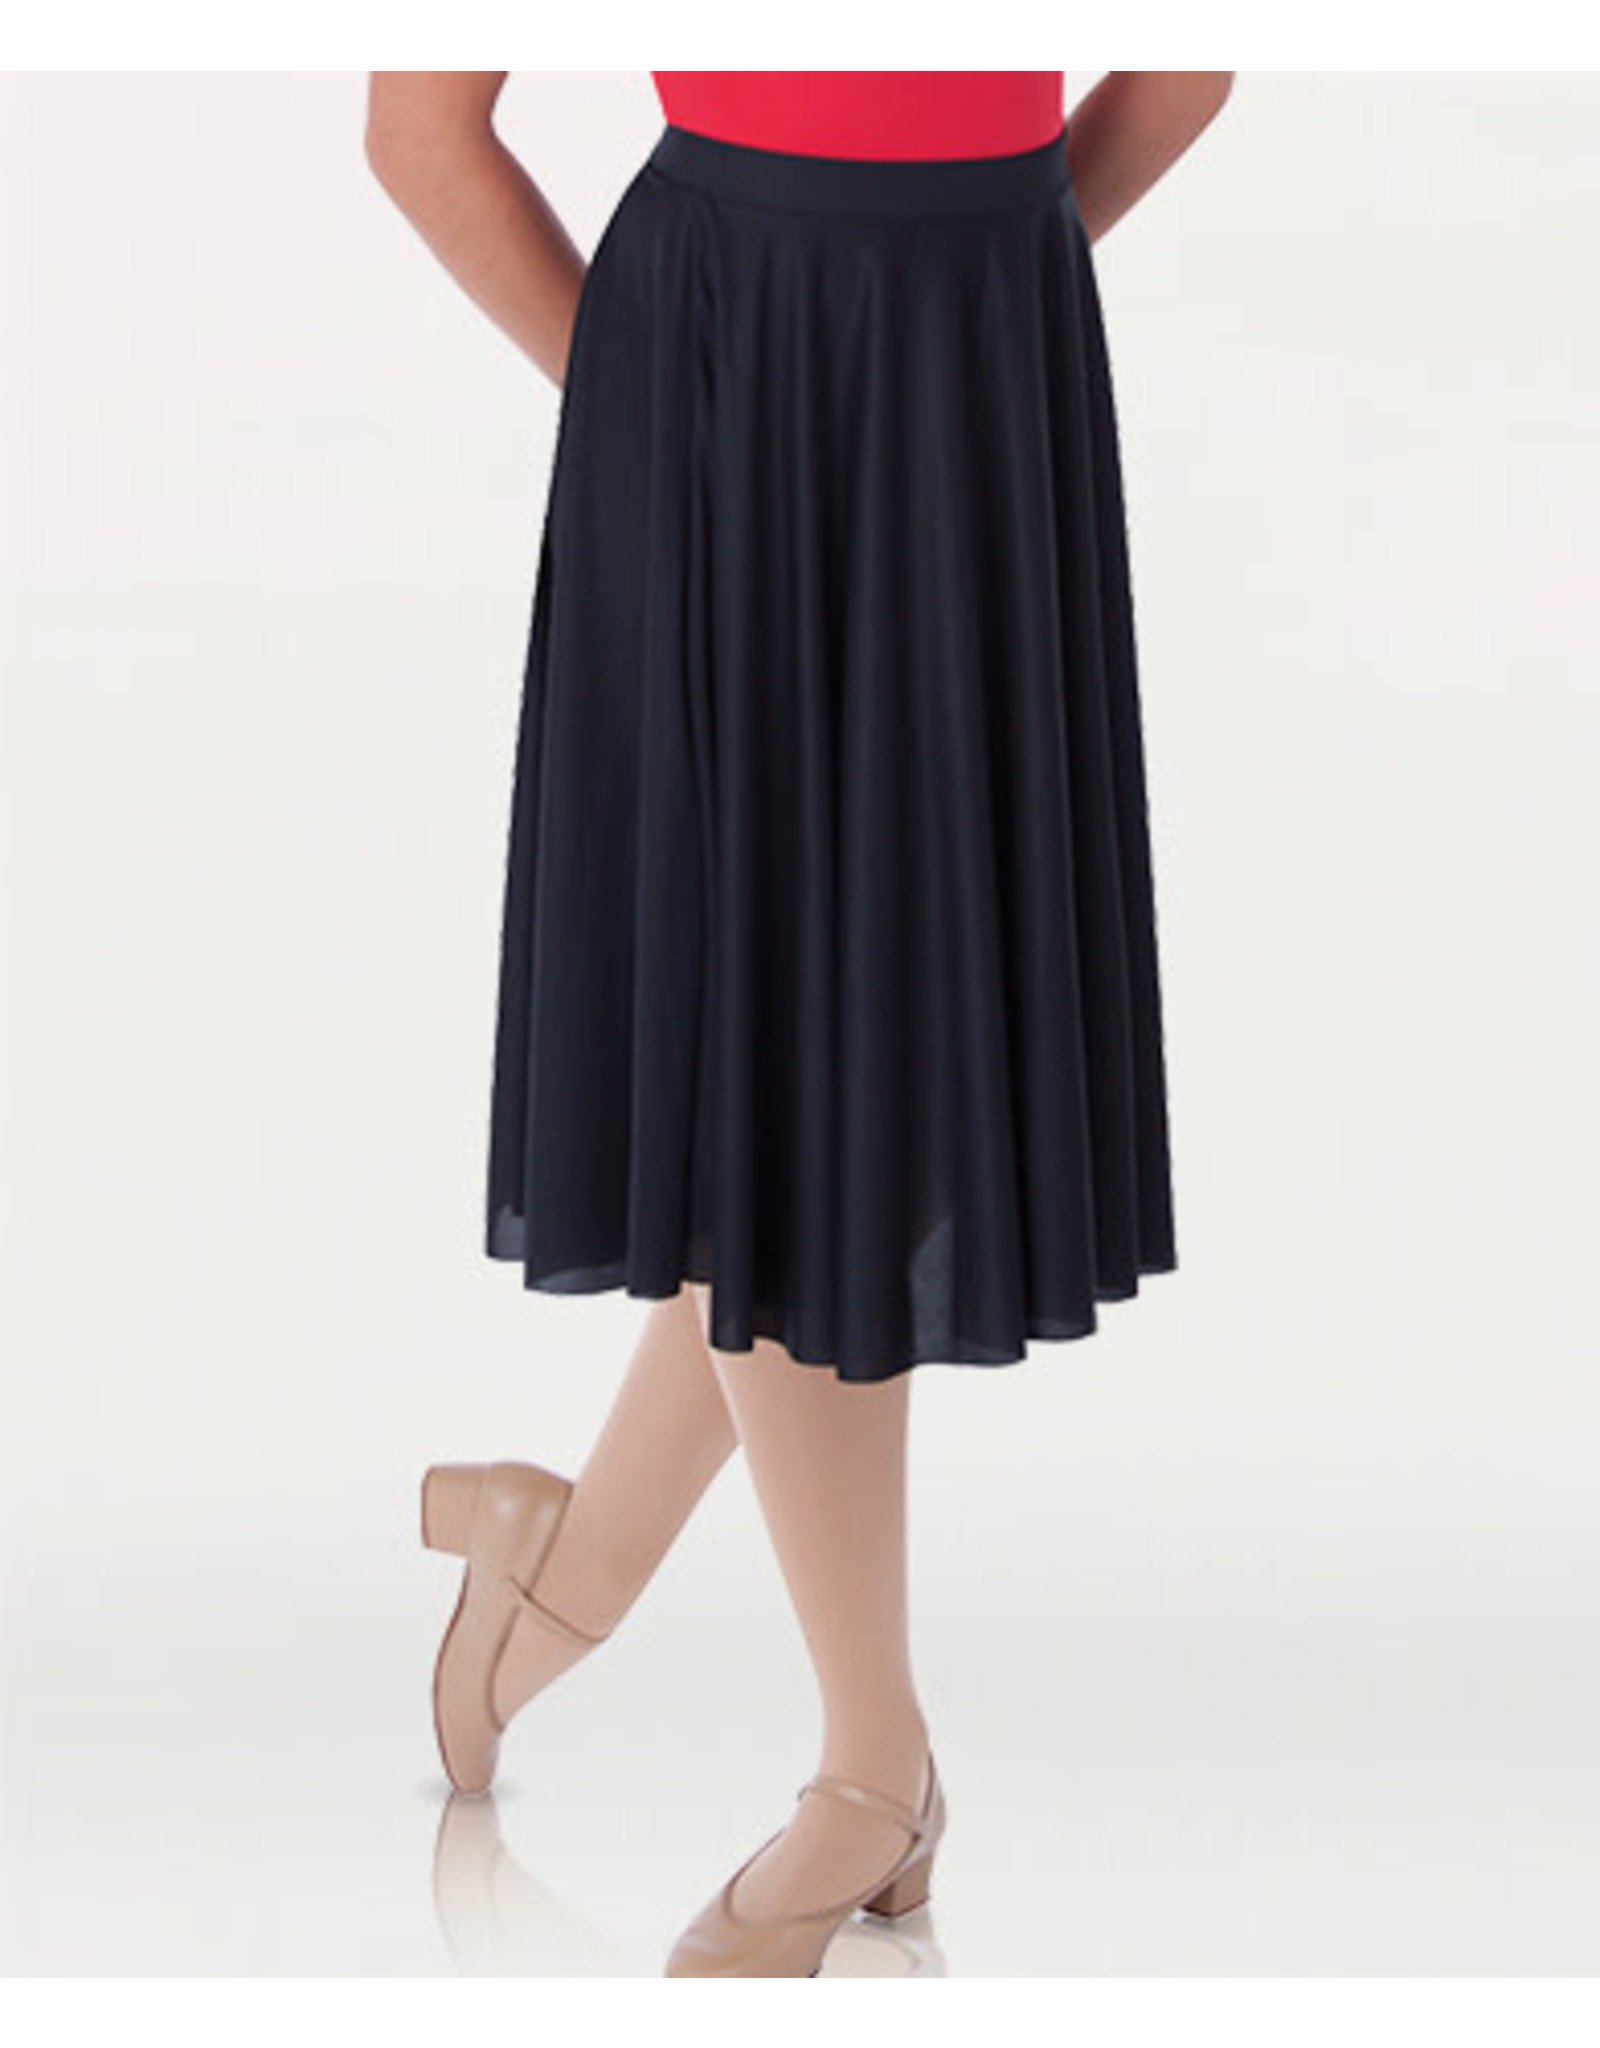 Body Wrappers Dance Below-The-Knee Circle Skirt (0511)